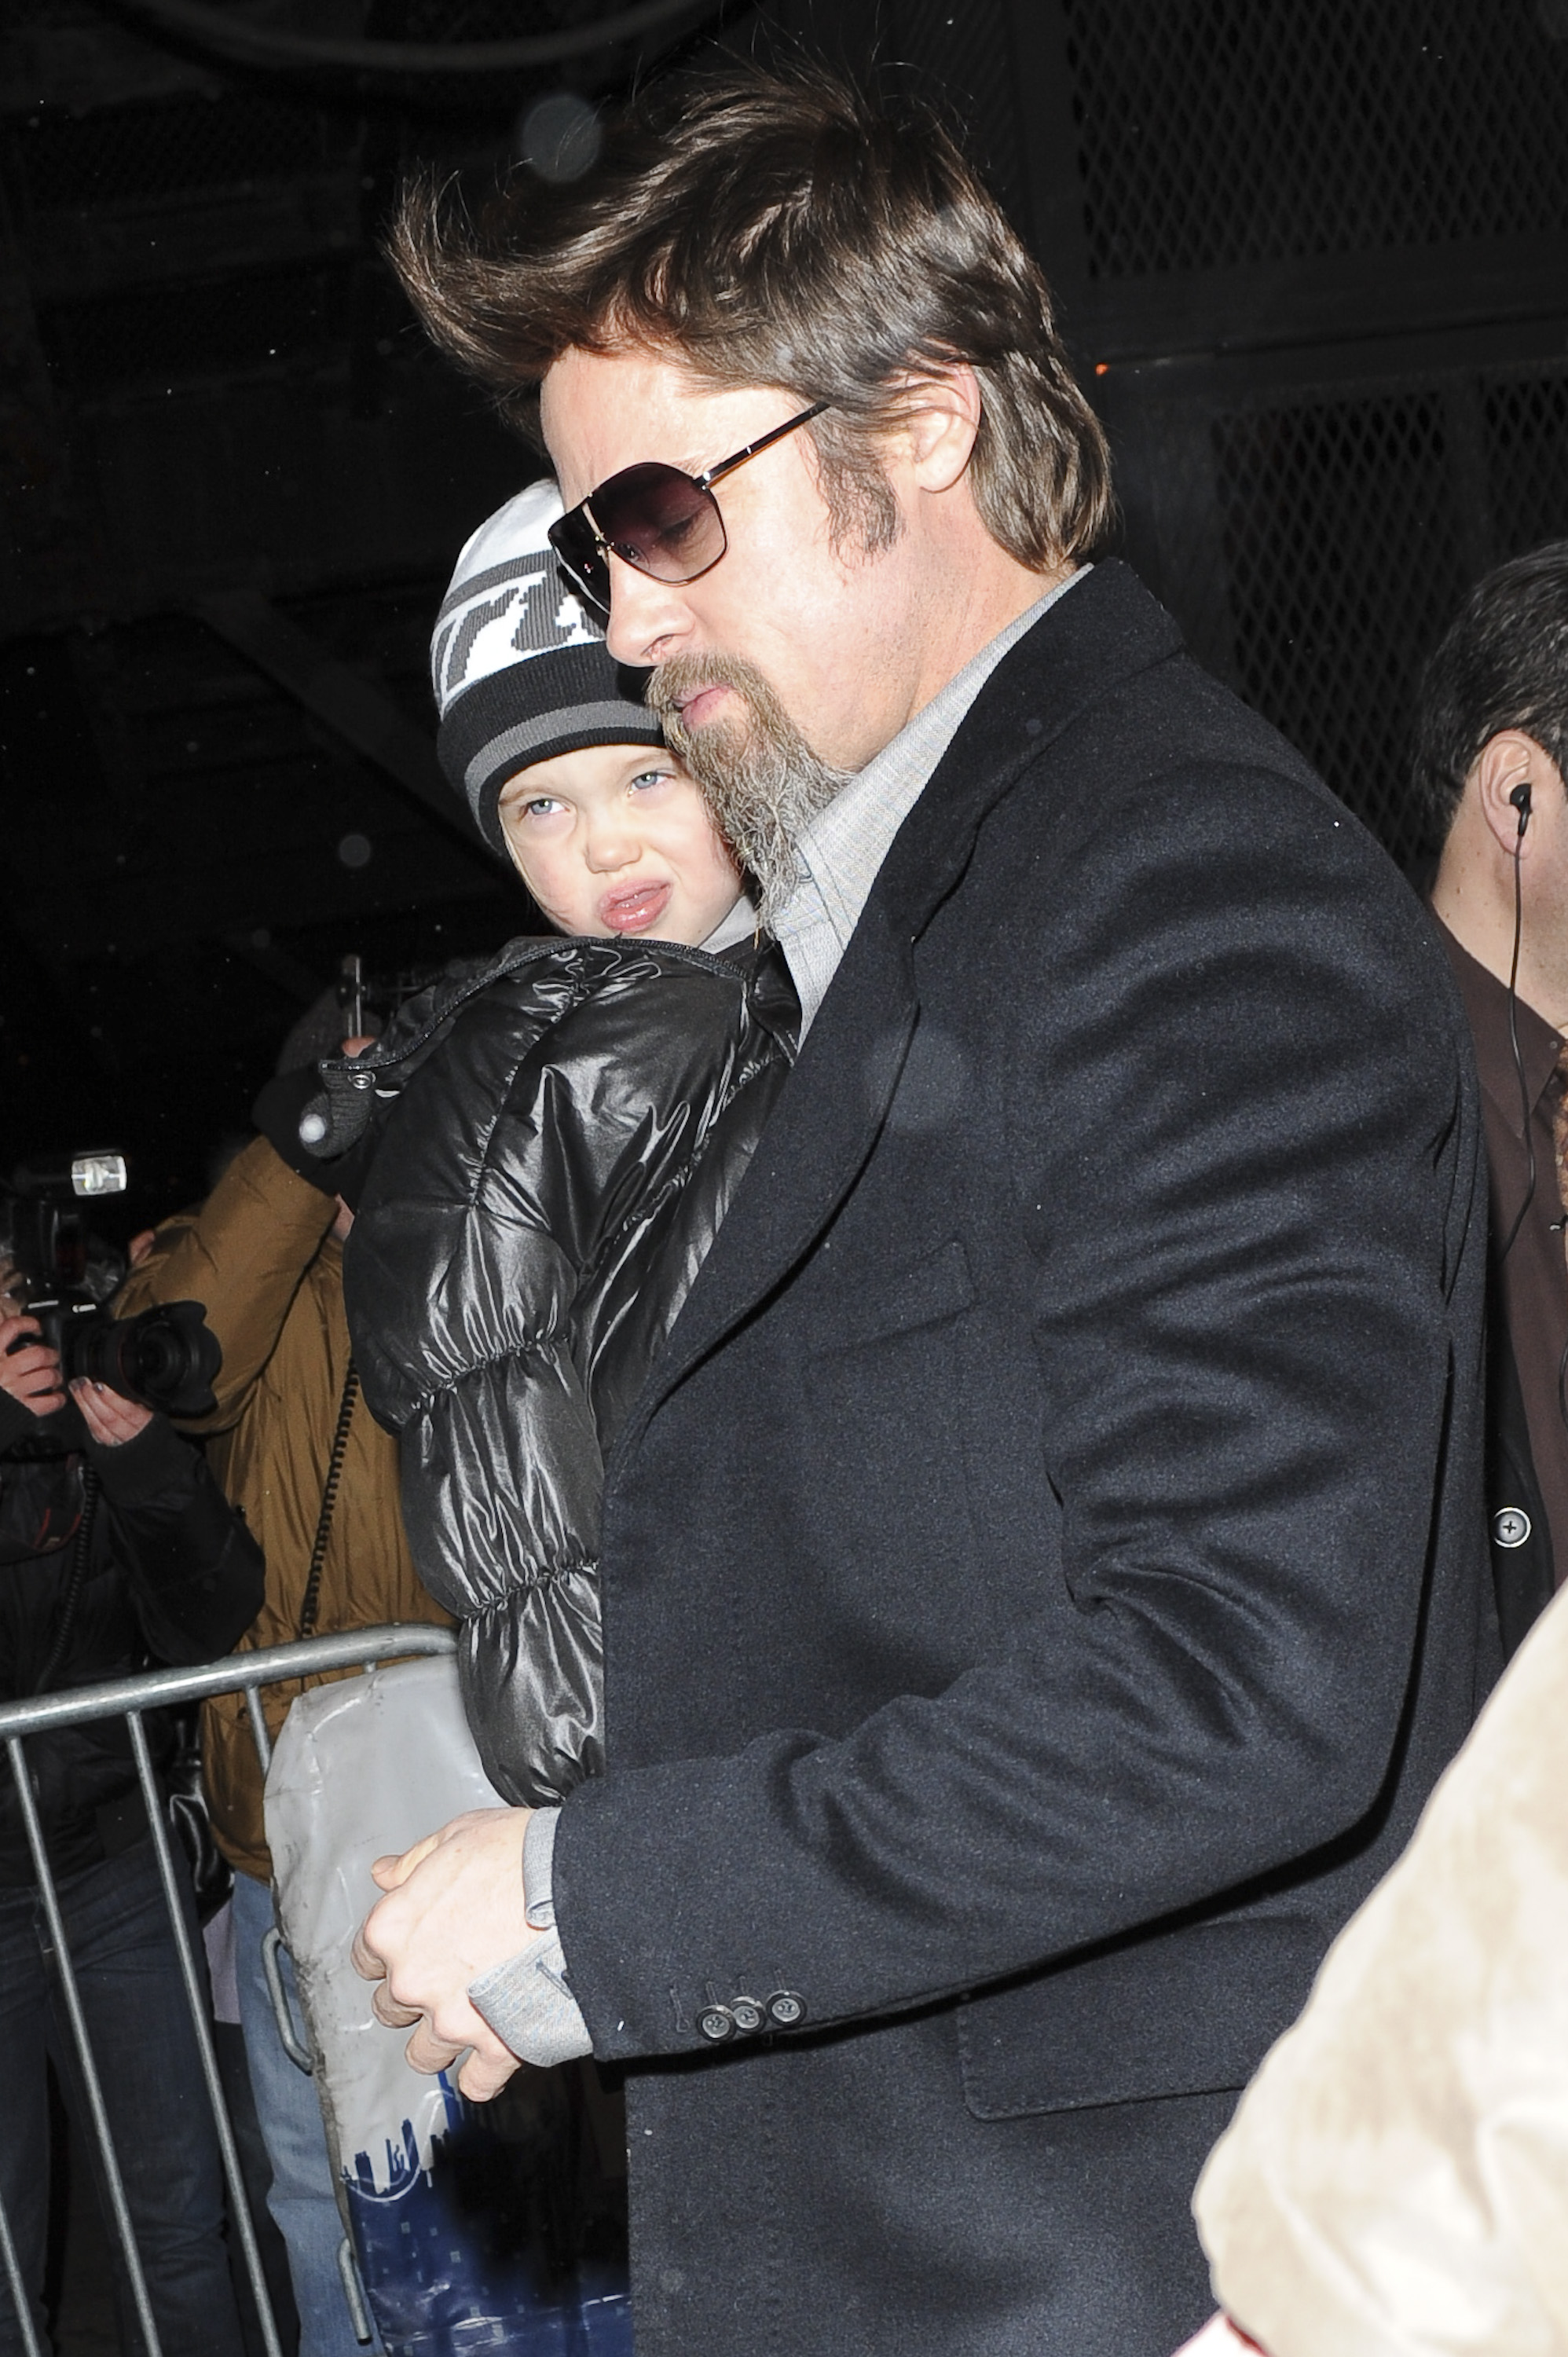 Brad Pitt (R) and Shiloh Nouvel Jolie-Pitt leave the "Mary Poppins" show at the New Amsterdam Theater on January 03, 2010 in New York City | Source: Getty Images